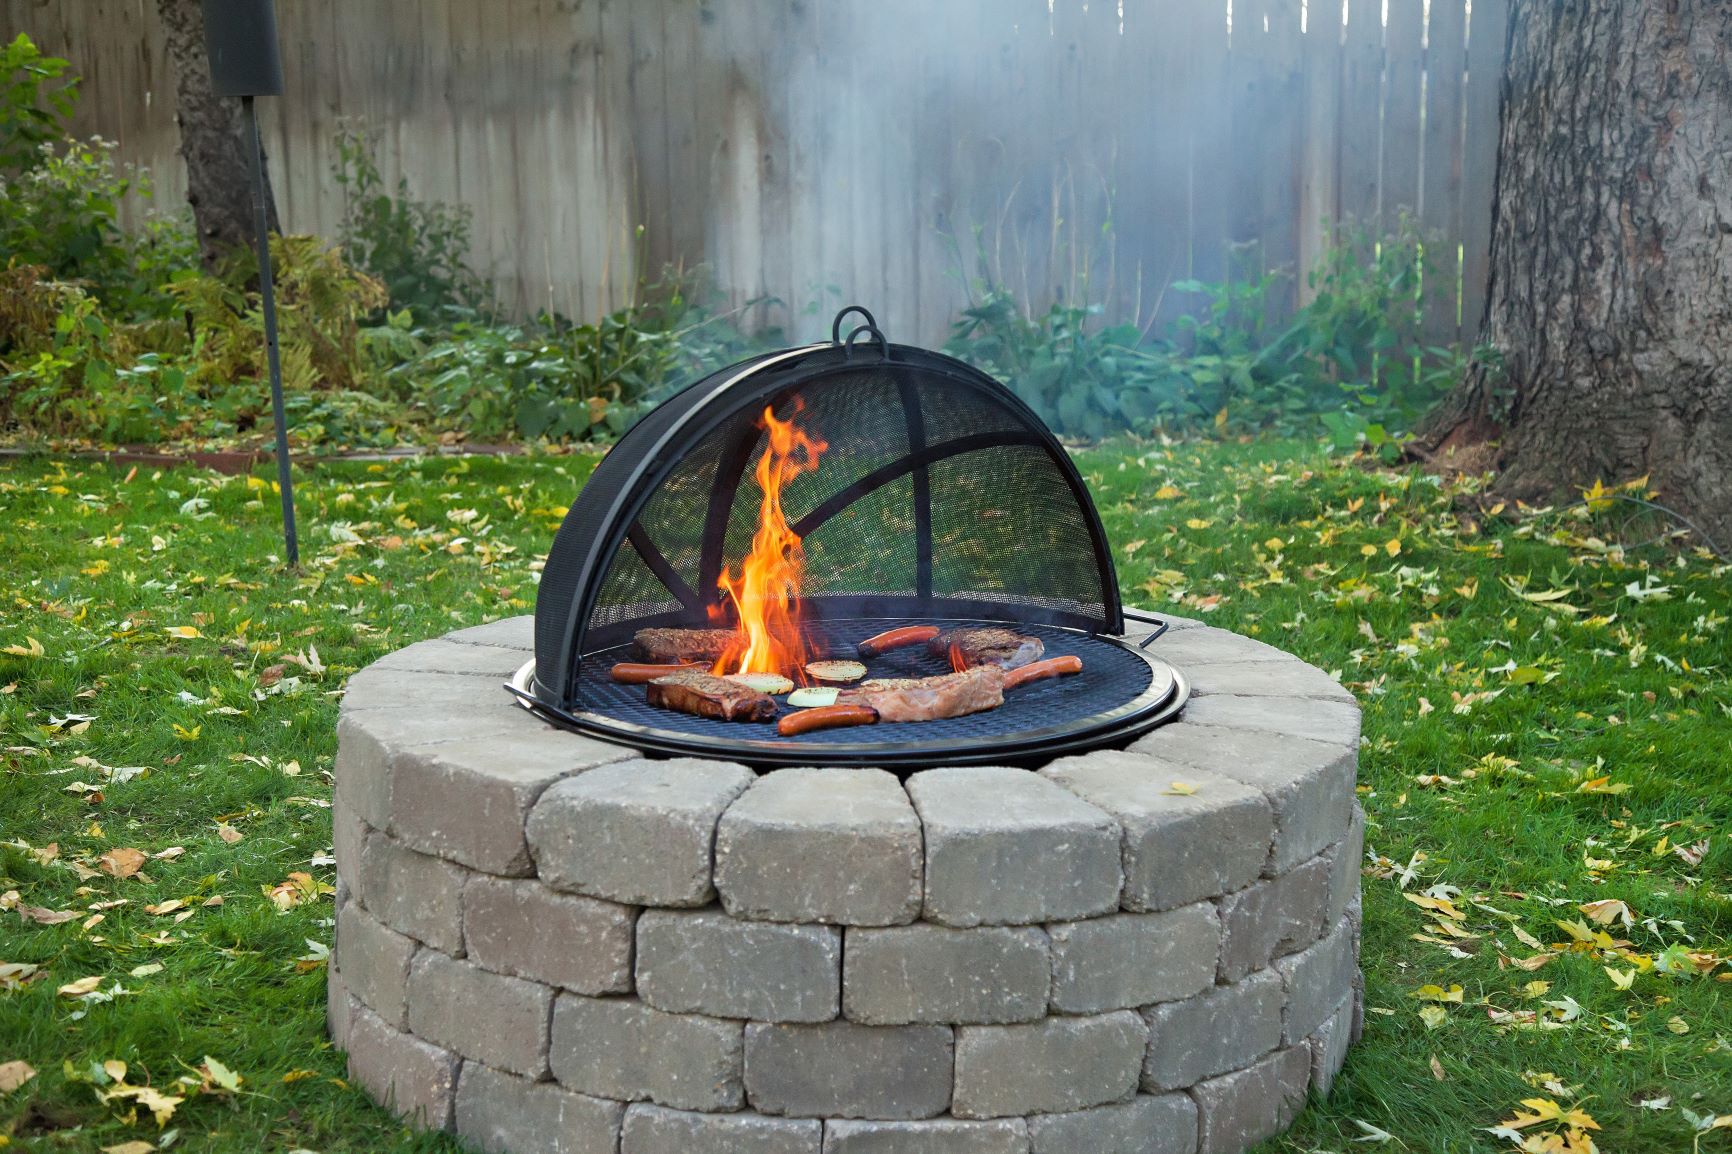 Cooking over an open fire pit flame